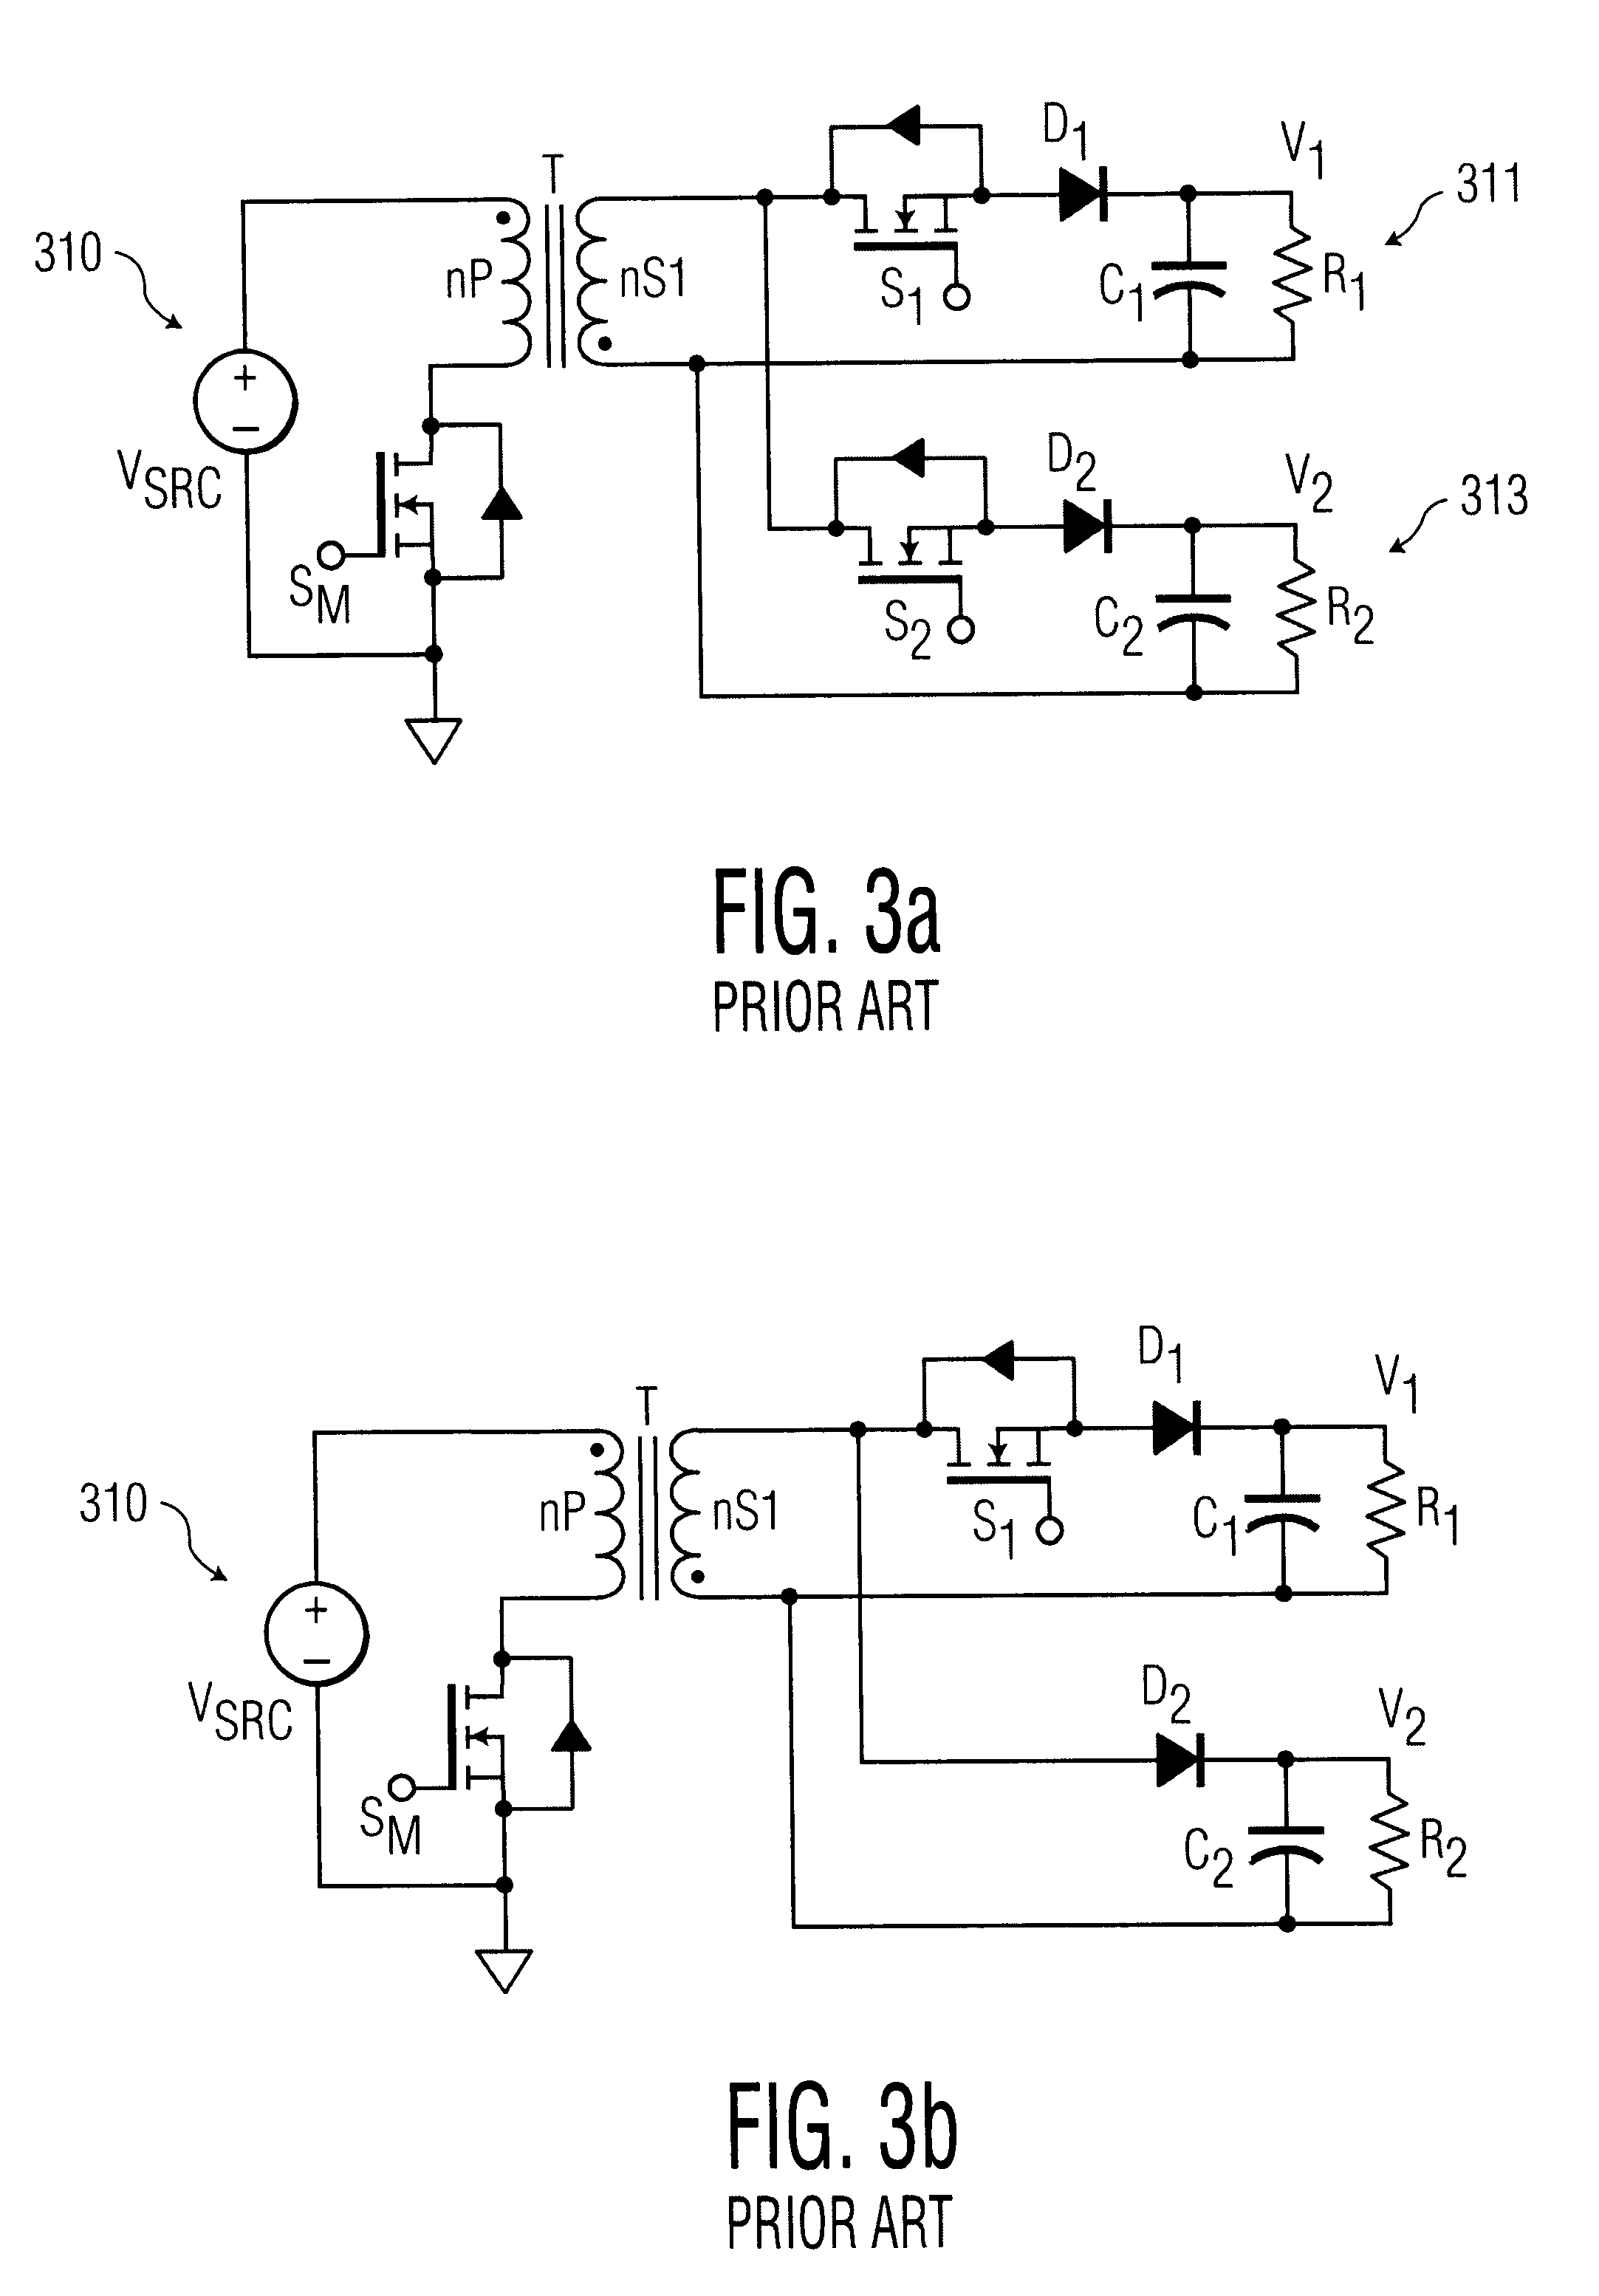 Independent regulation of multiple outputs in a soft-switching multiple-output flyback converter